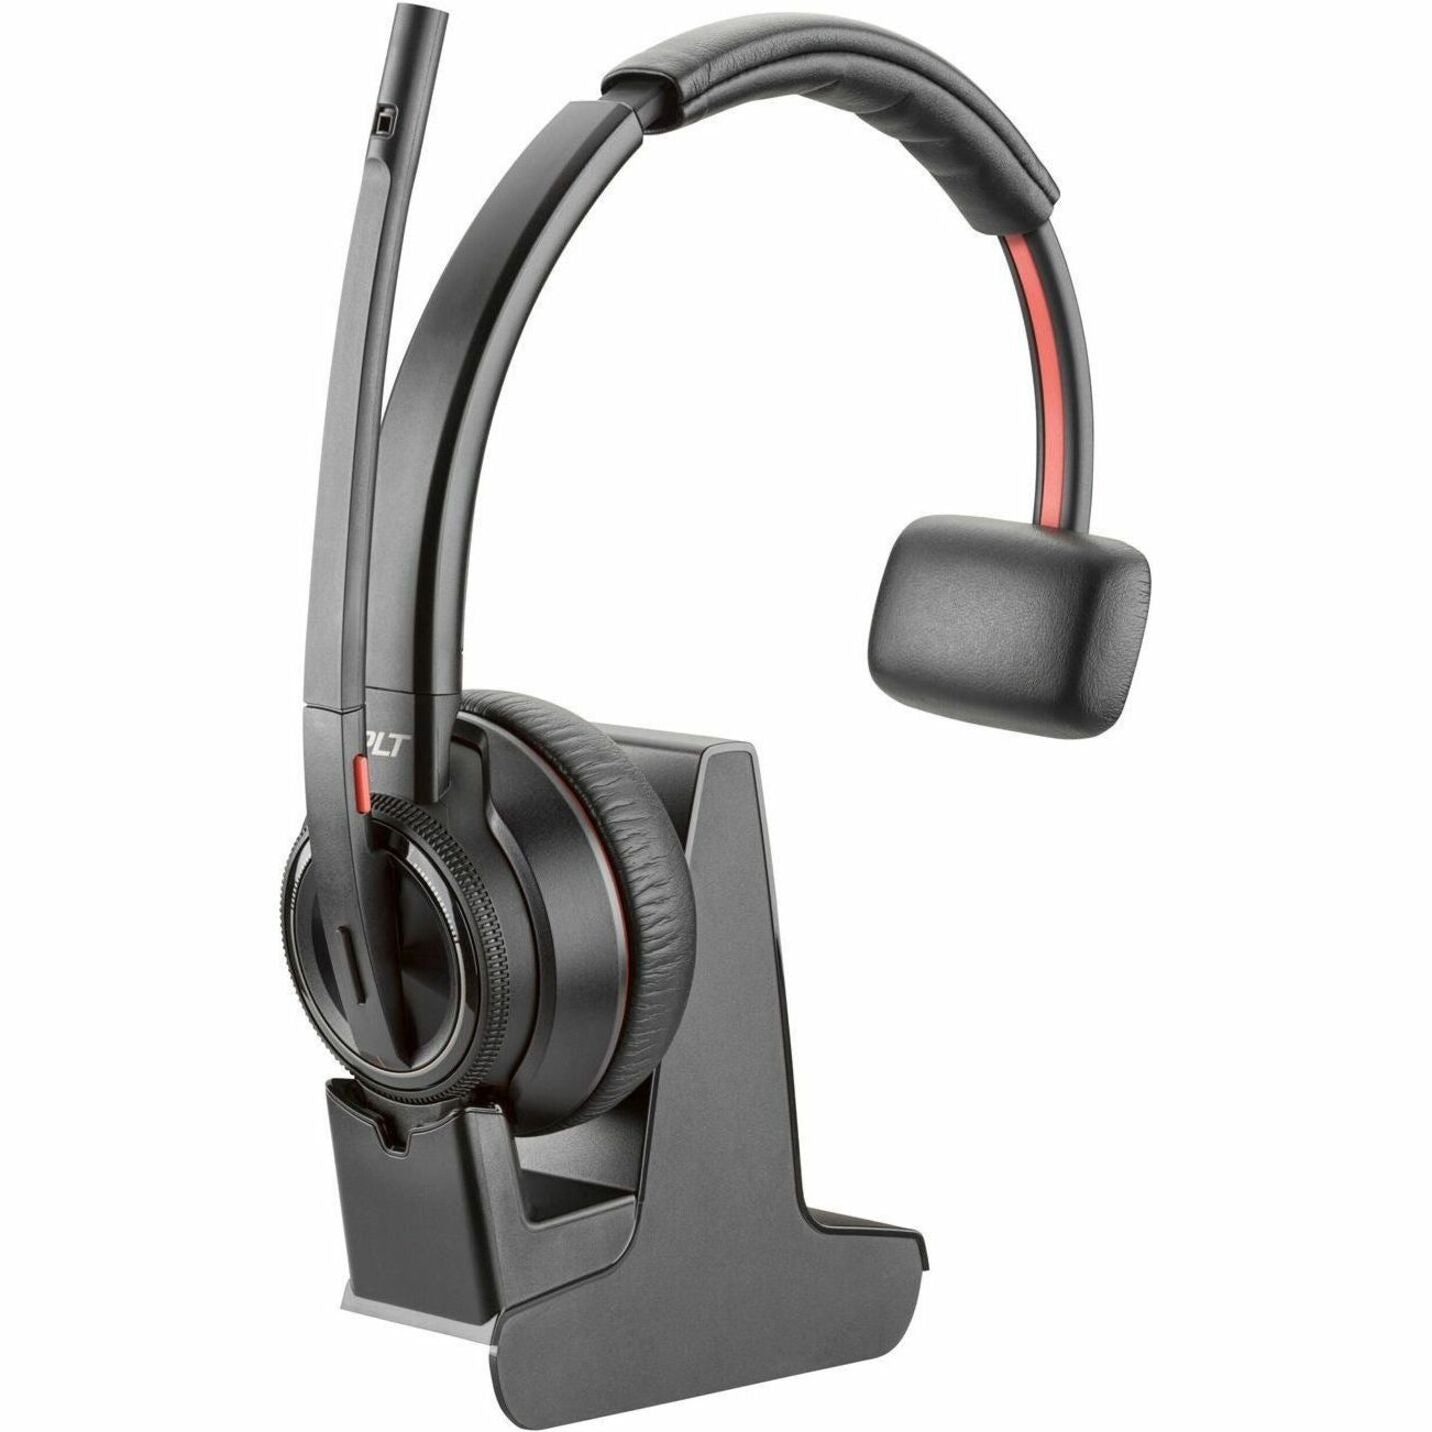 Poly Savi 8210 UC DECT 1920-1930 MHz USB-A Headset, Wireless On-ear Over-the-head Mono Headset with Noise Cancelling Microphone